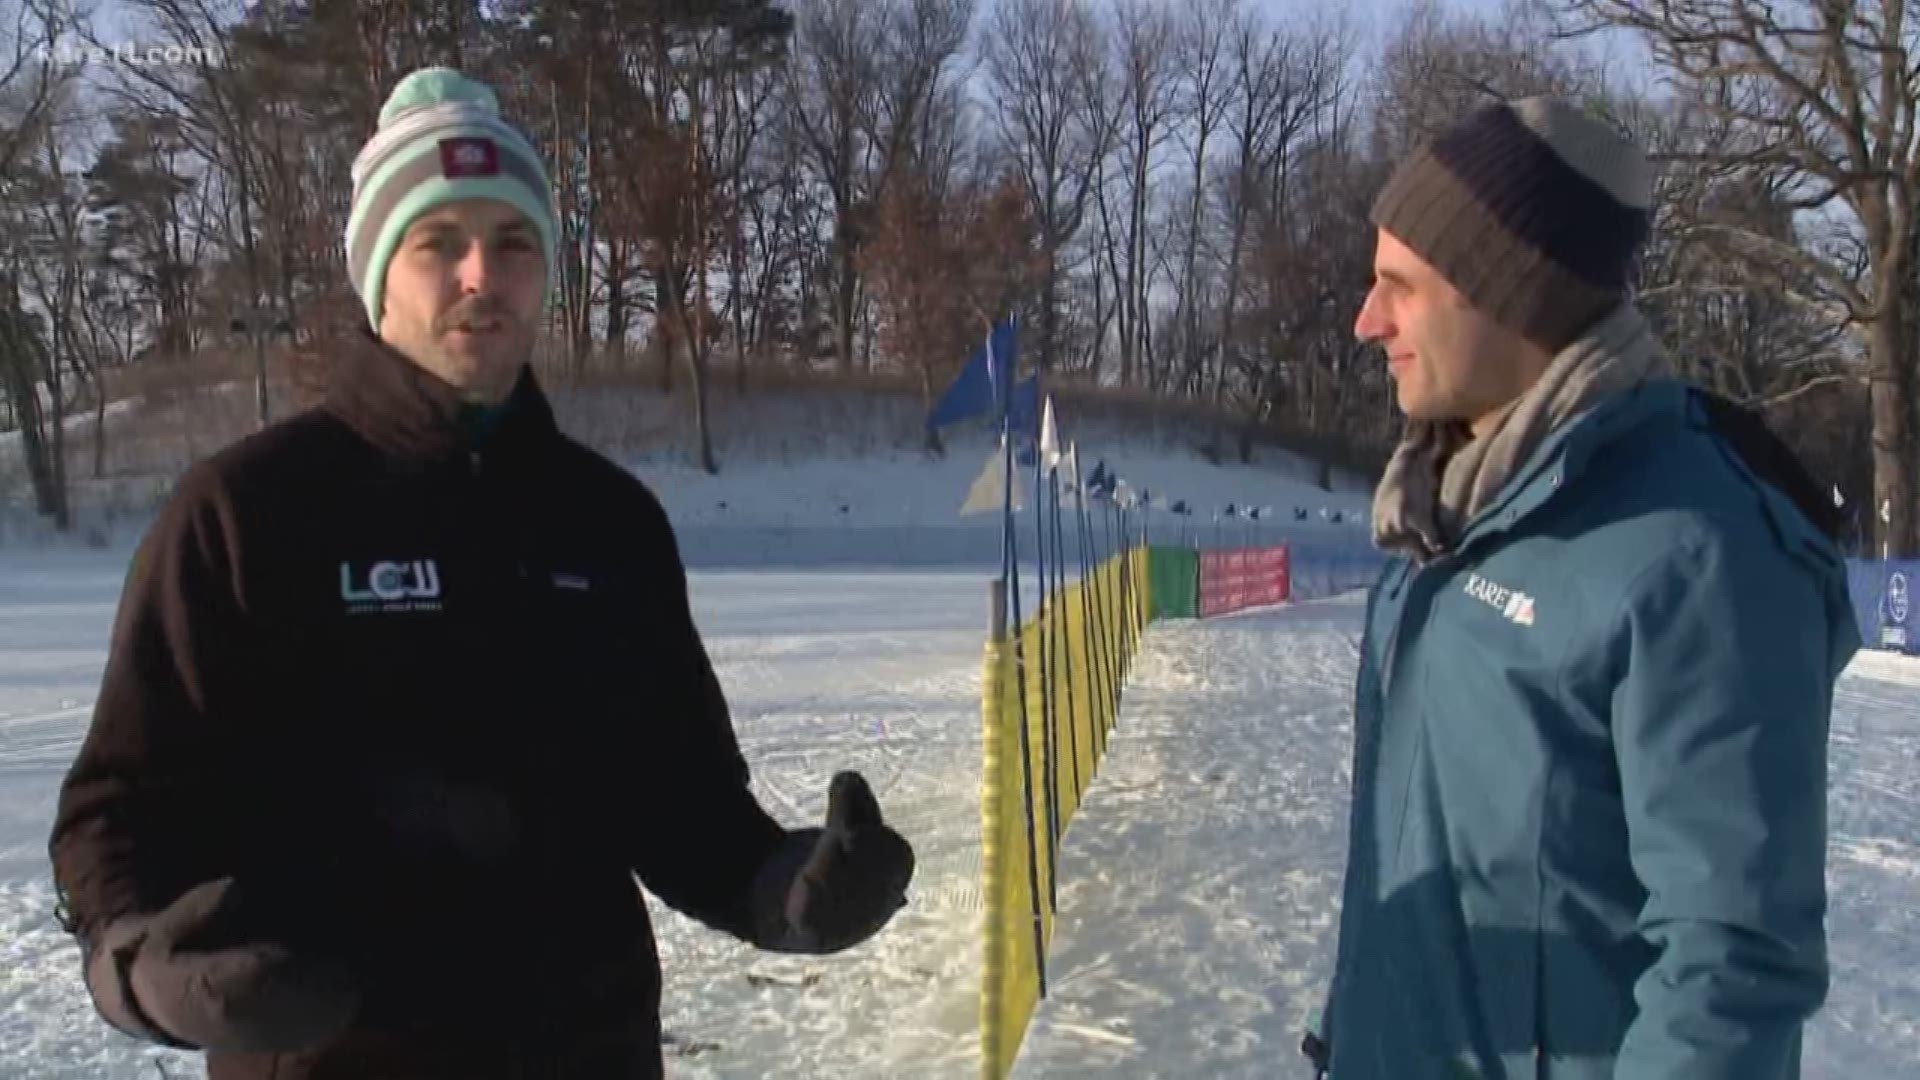 KARE 11's Kris Laudien keeps exploring the chilly fun of Minnesota at one of the area's most popular winter events: The City of Lakes Loppet in Minneapolis. https://kare11.tv/2G135gP